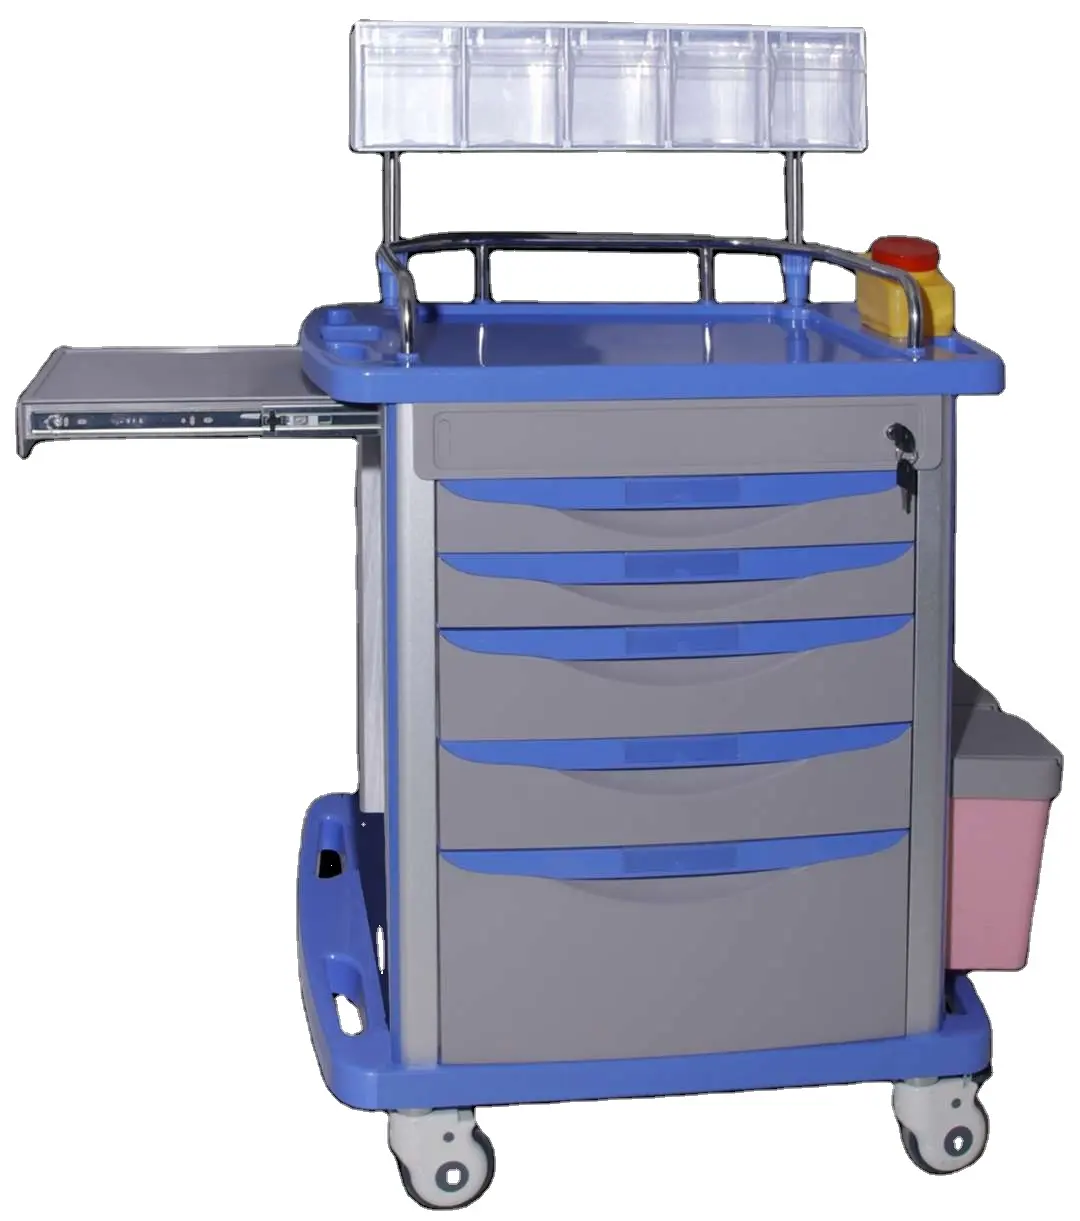 China Cheap Abs Plastic Hospital Medical Clinic Emergency Medicine Trolley Delivery Medication Drug Dispensing Cart